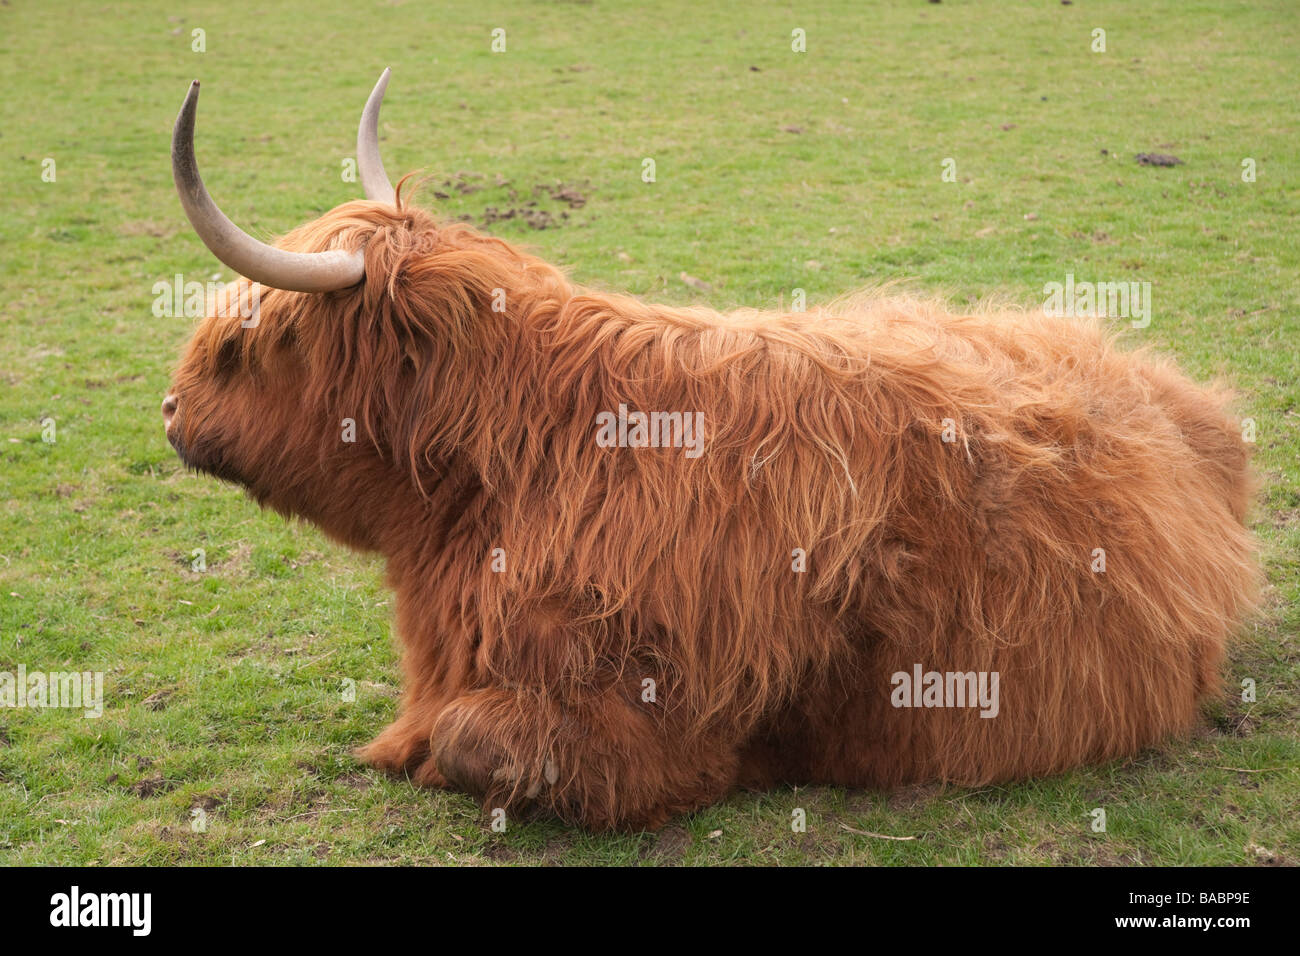 Monk Park Farm zoo type attraction near Thirsk Yorkshire Highland cow Stock Photo